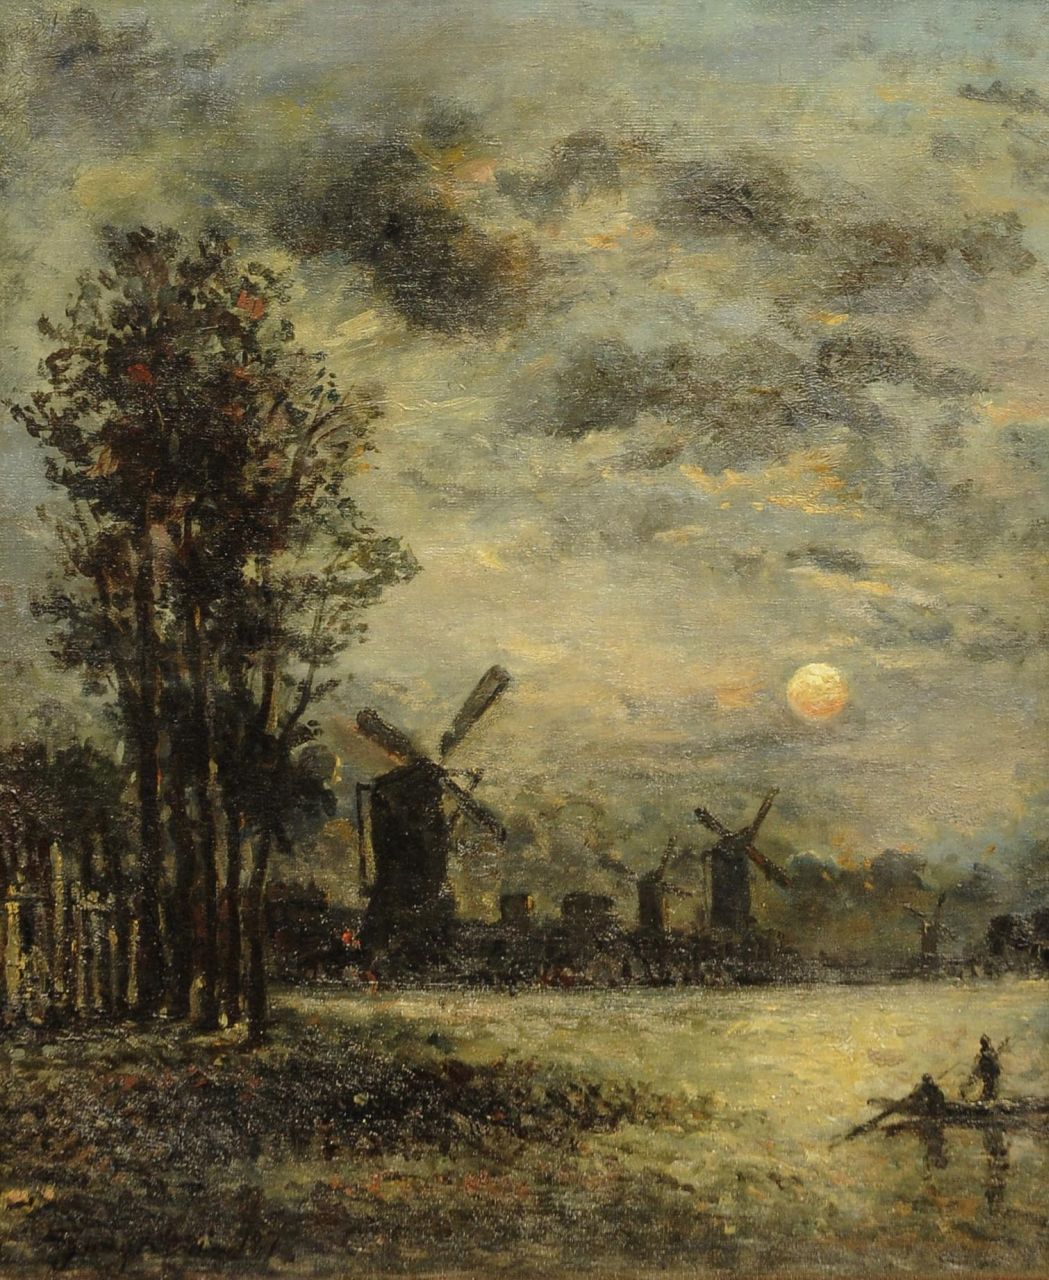 Jongkind J.B.  | Johan Barthold Jongkind, Windmills along a river by moonlight, oil on canvas 46.3 x 38.8 cm, signed l.l. and dated 187(0)